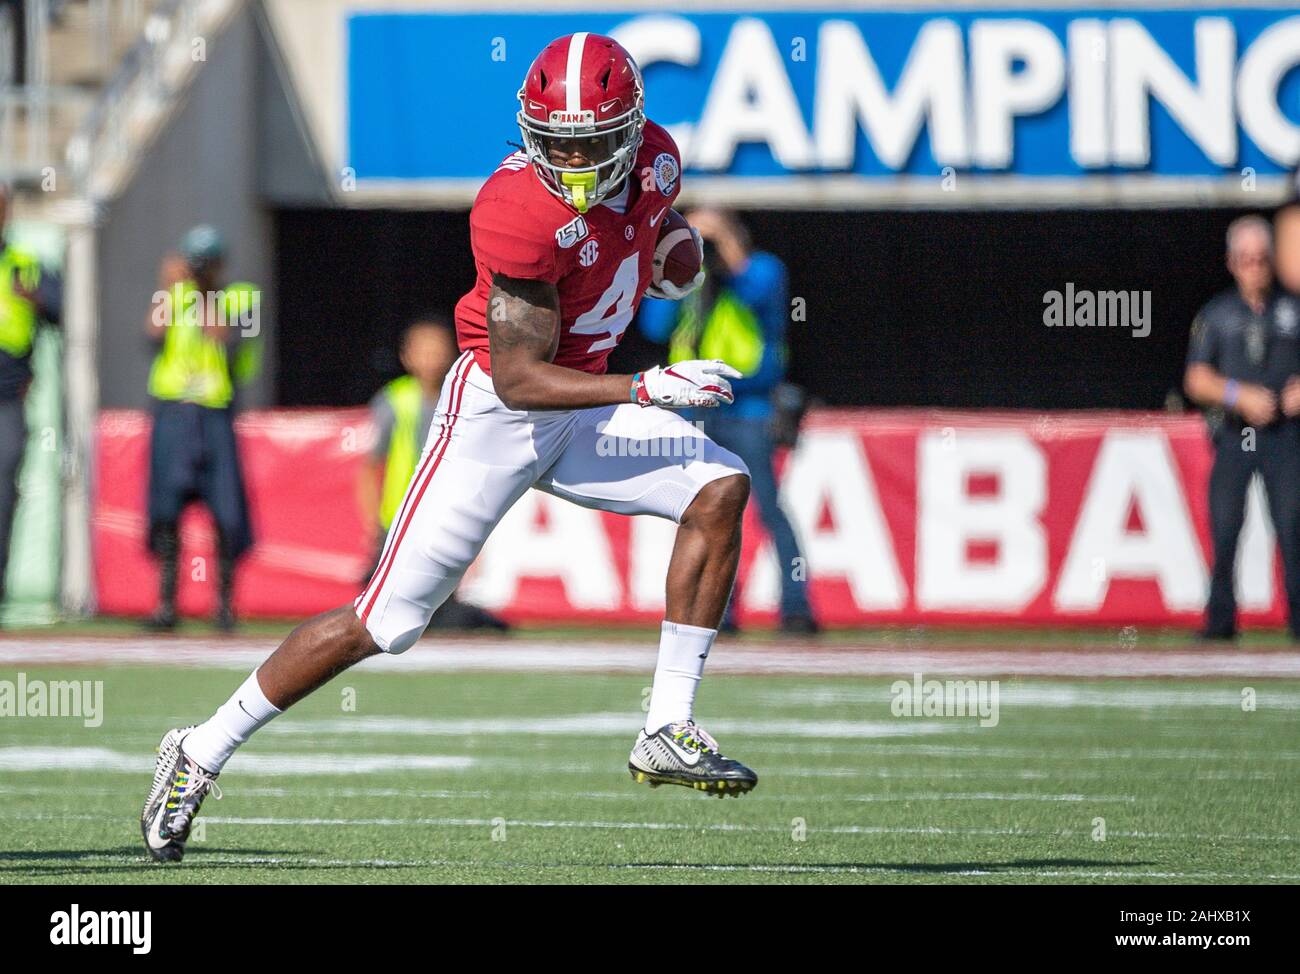 Orlando, FL, USA. 1st Jan, 2020. Alabama Crimson Tide wide receiver Jerry Jeudy (4) runs with the ball during the VRBO Citrus Bowl game between Alabama Crimson Tide and the Michigan Wolverines at Camping World Stadium in Orlando, Fl. Romeo T Guzman/CSM/Alamy Live News Stock Photo